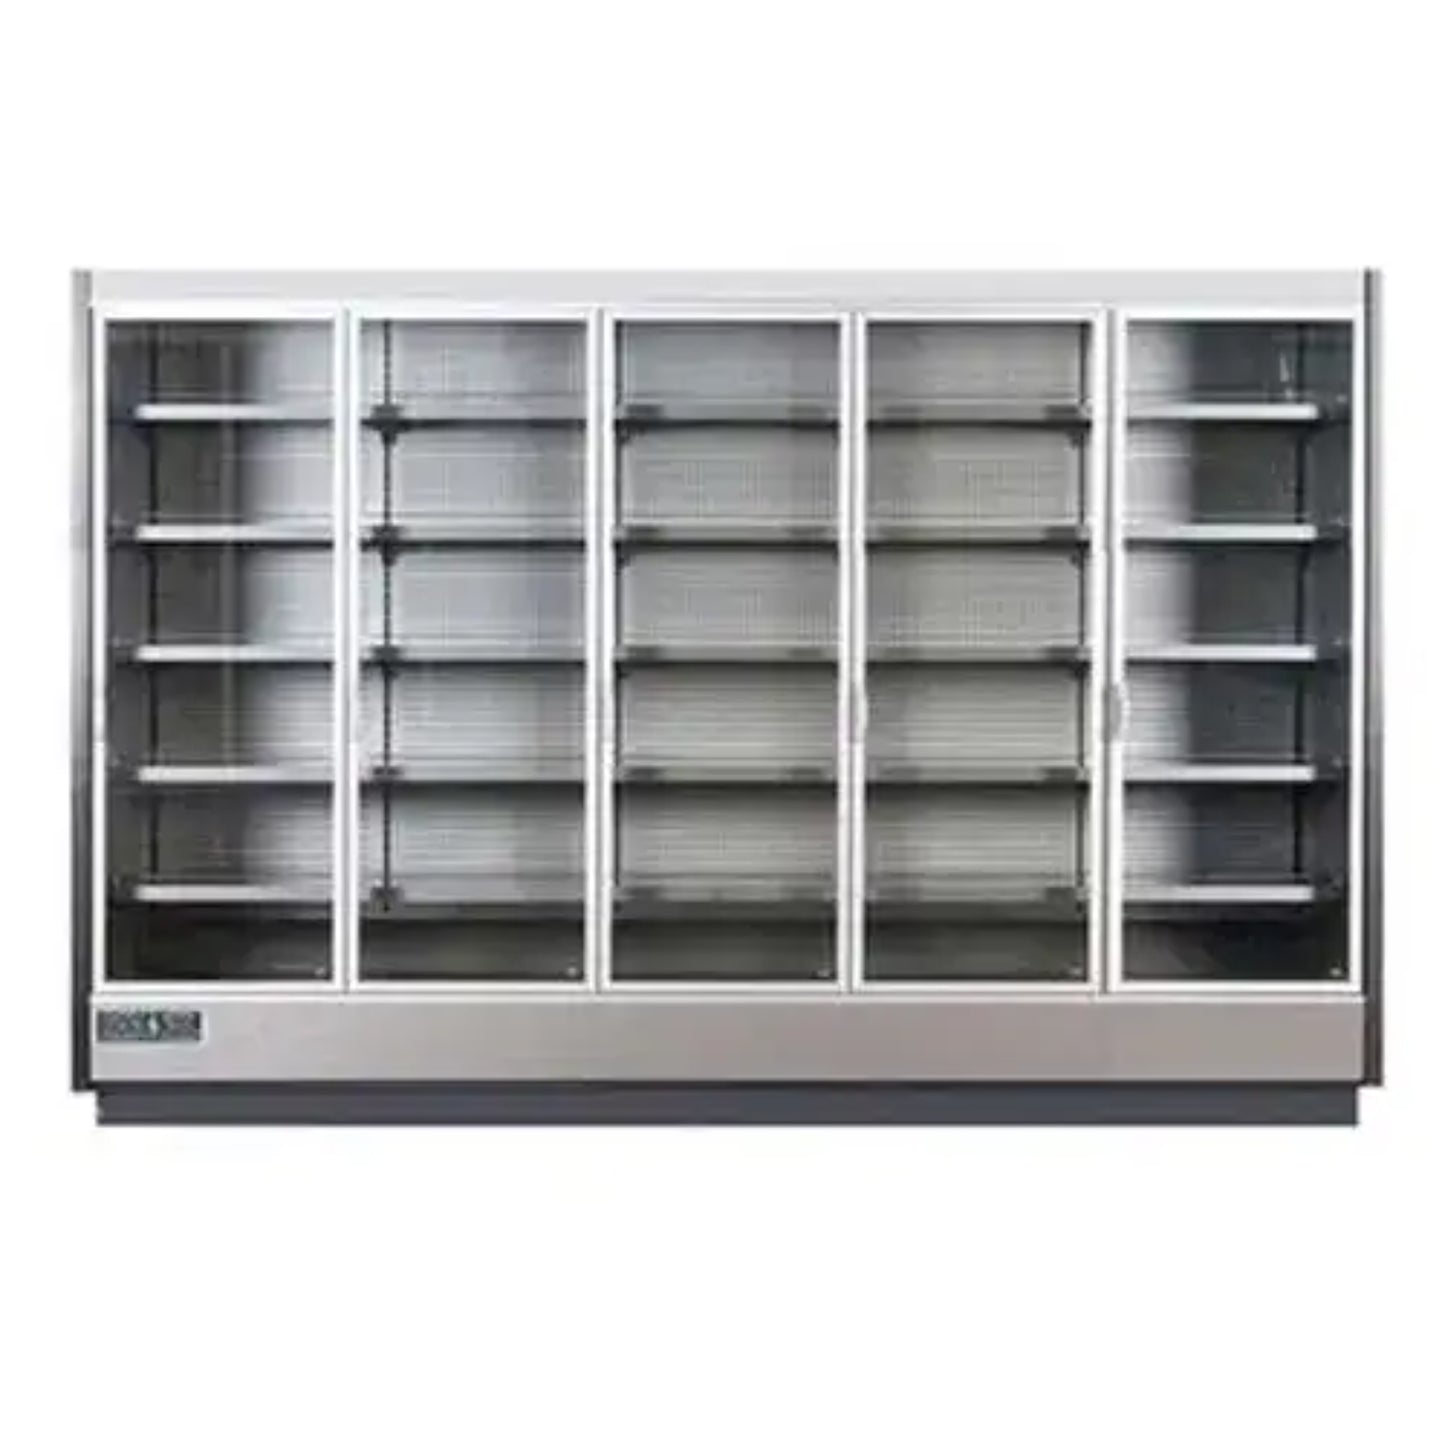 Hydra-Kool KGV-MR-5-R 5-Door High Volume Grab And Go Remotely Cooled